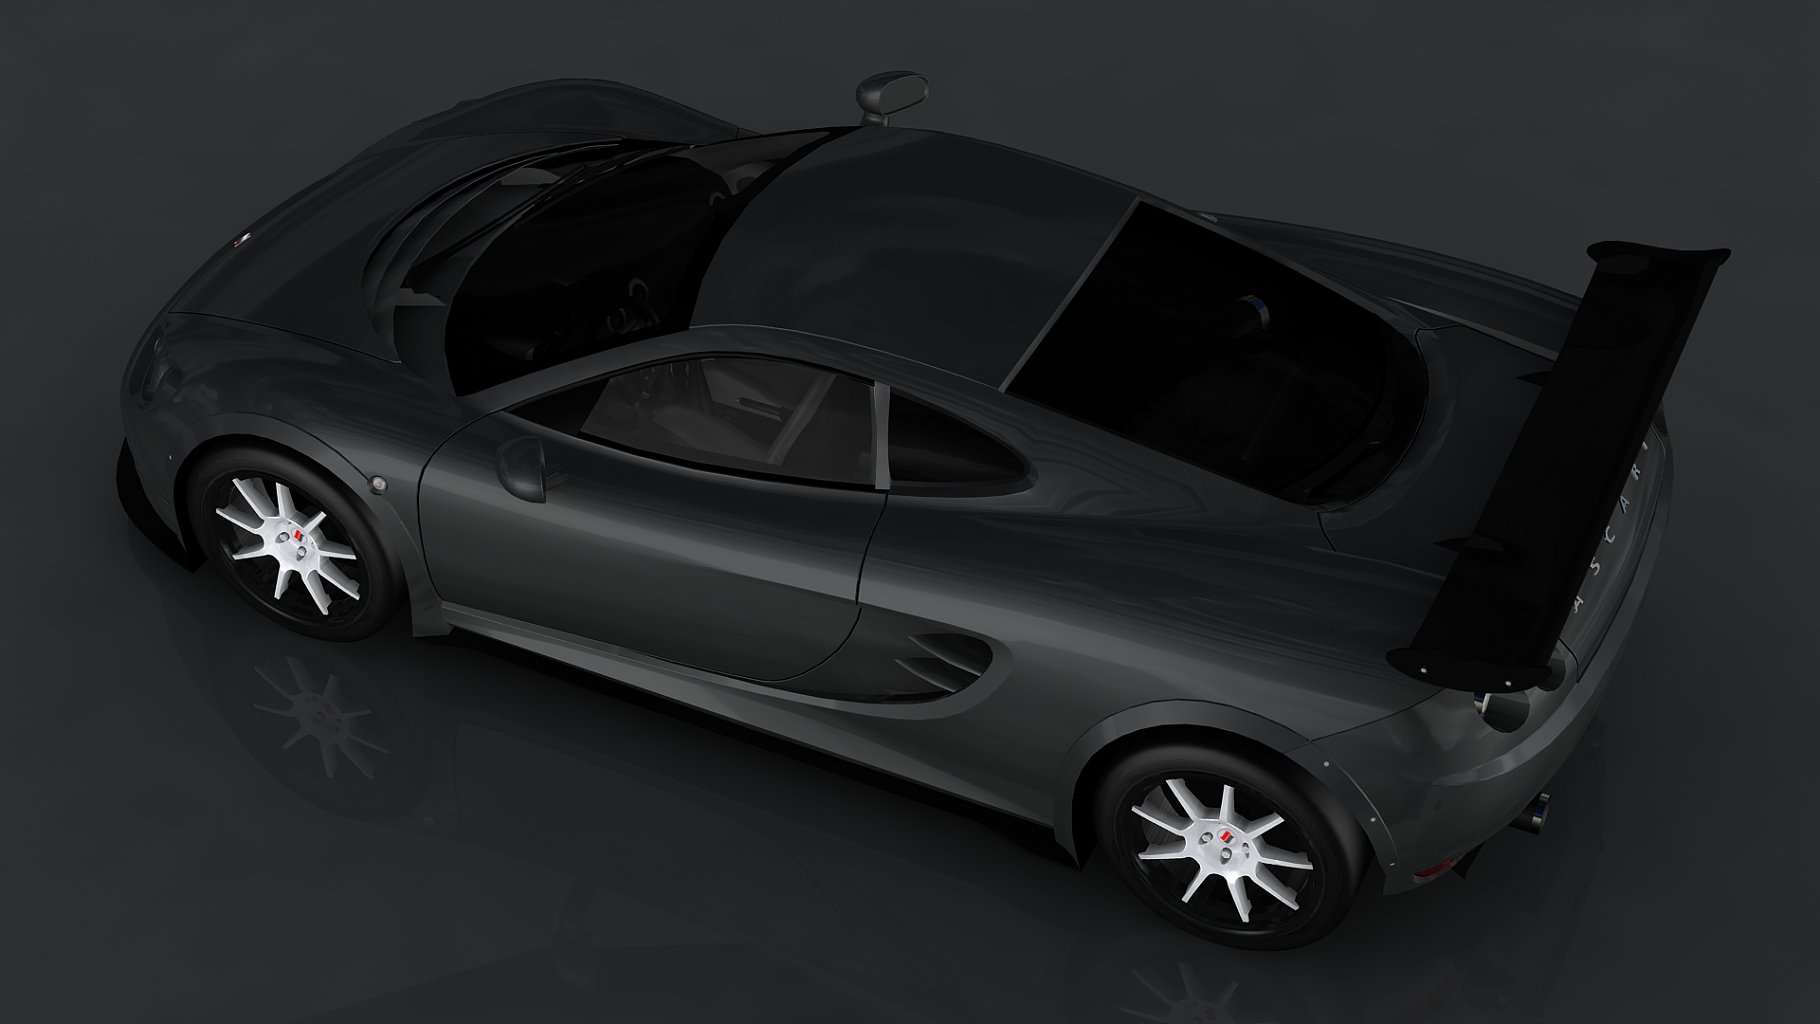 Mockup of ascari kz1r low poly 3d model from above.